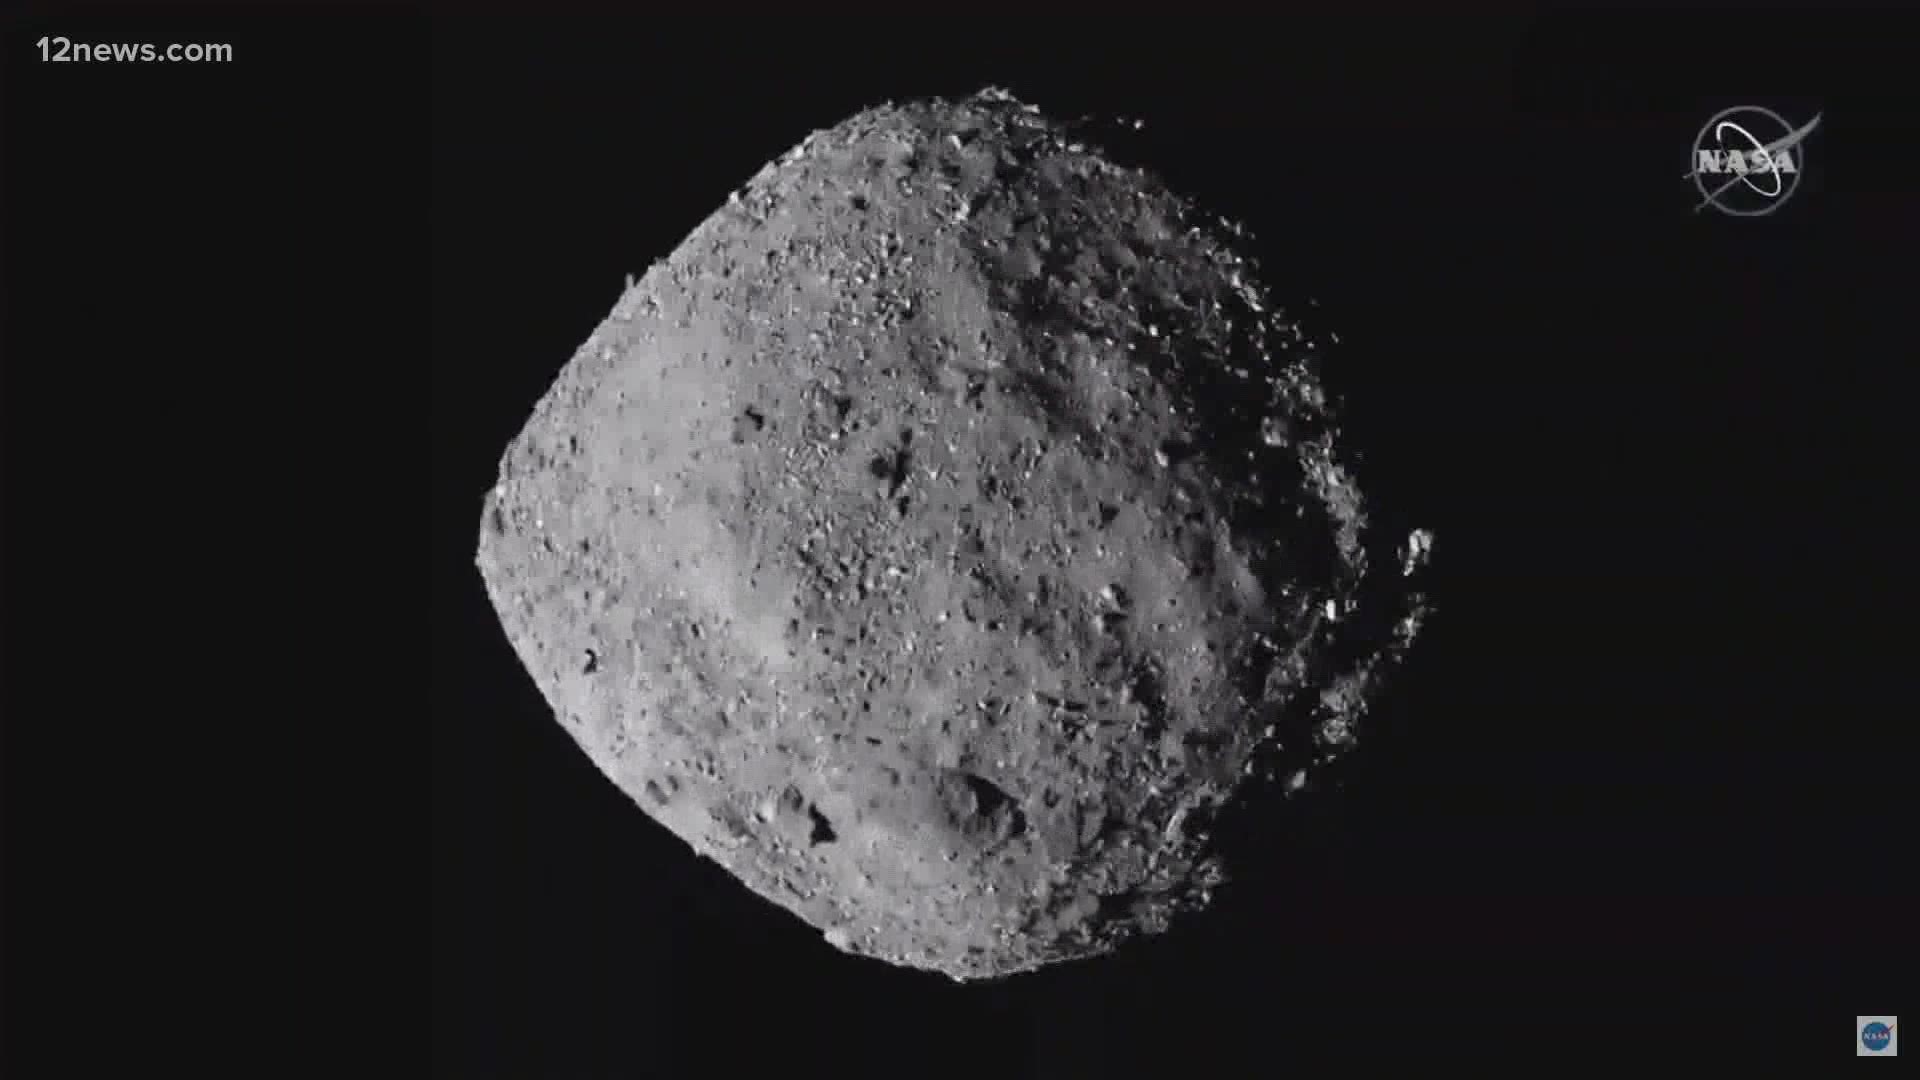 The Osiris-REx, a spacecraft dreamt up at UArizona, landed on a near-Earth asteroid on Tuesday. It will collect samples and bring them home around 2023.